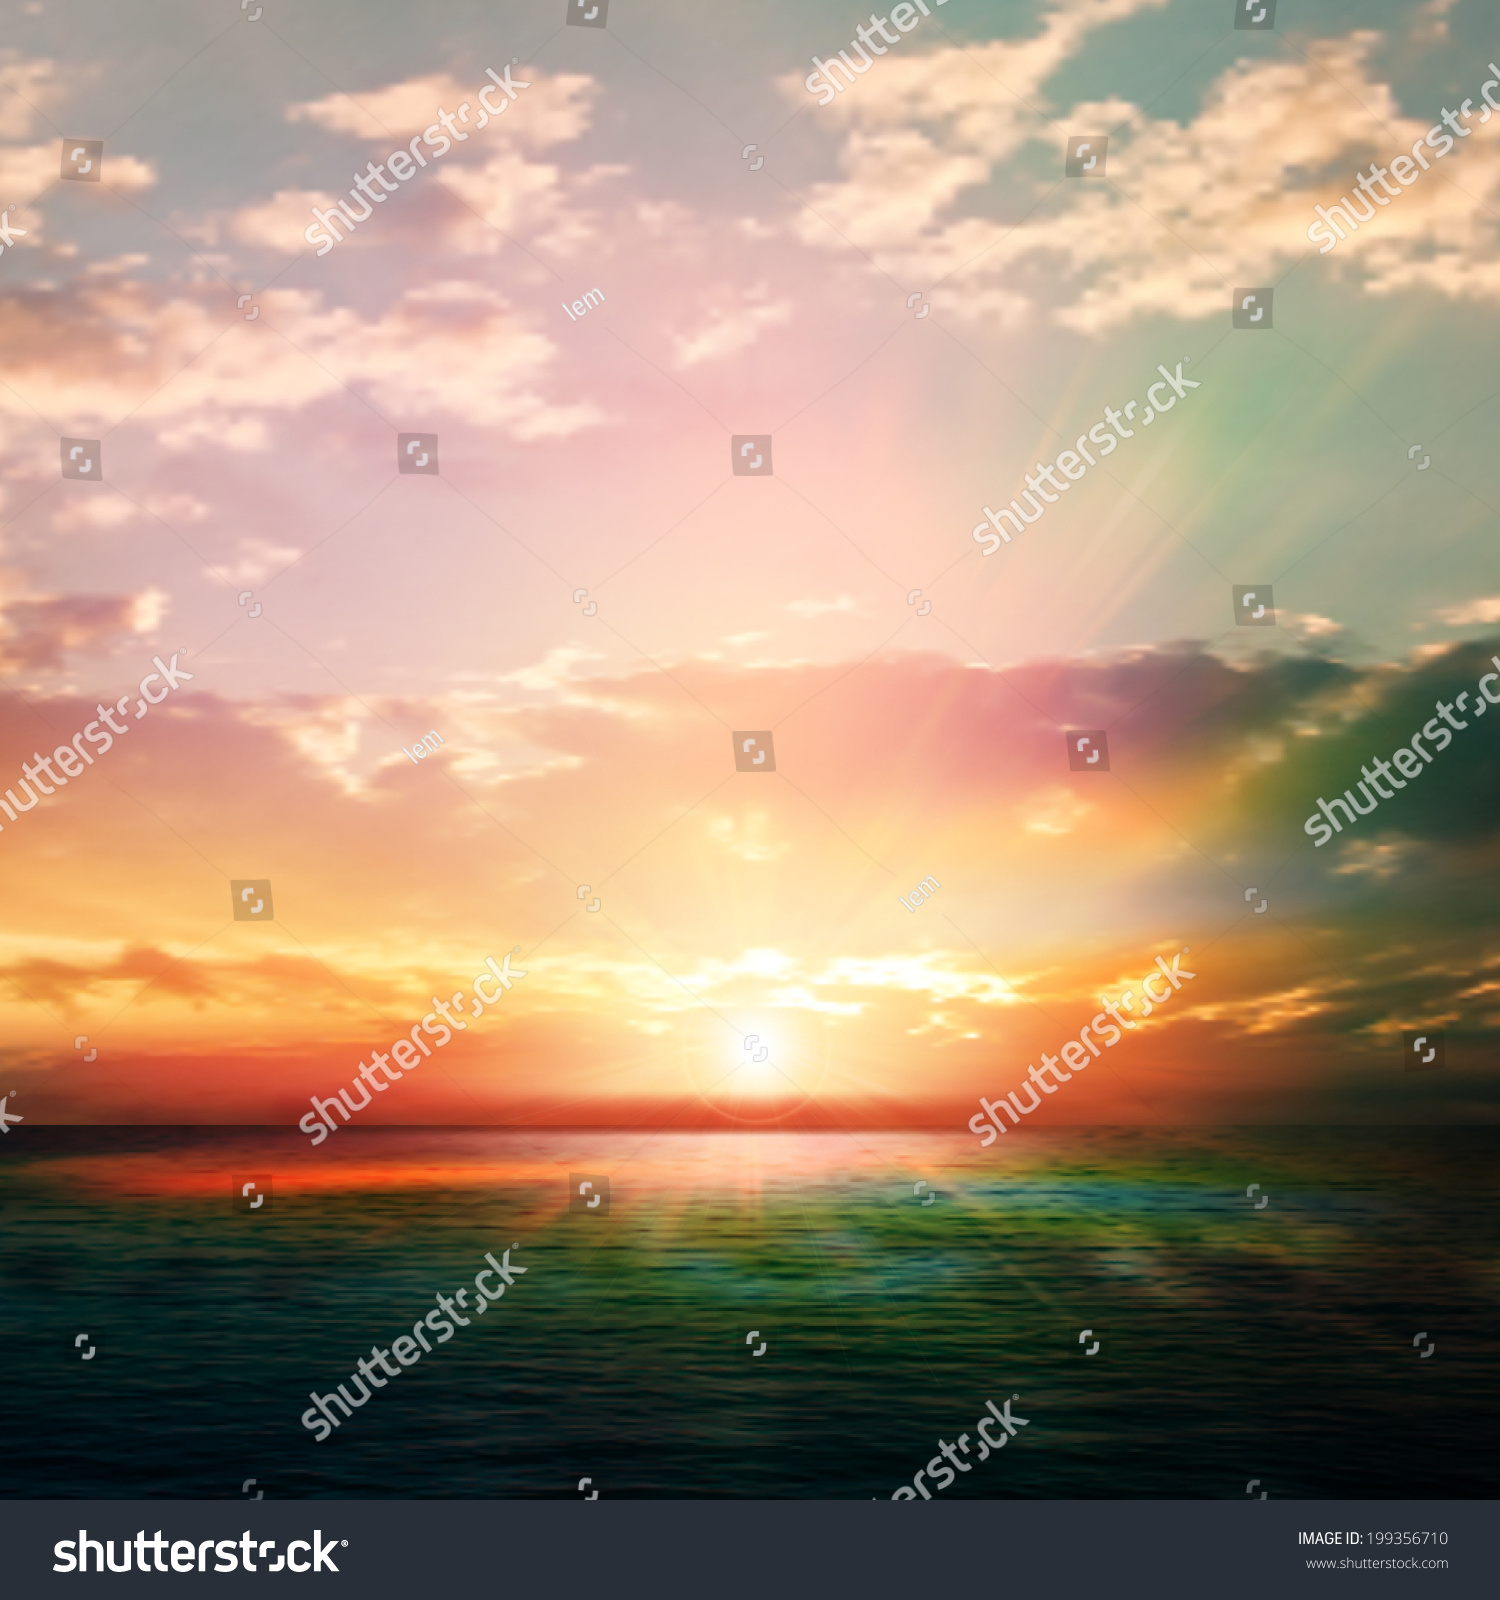 abstract nature background with sunrise and green ocean #199356710